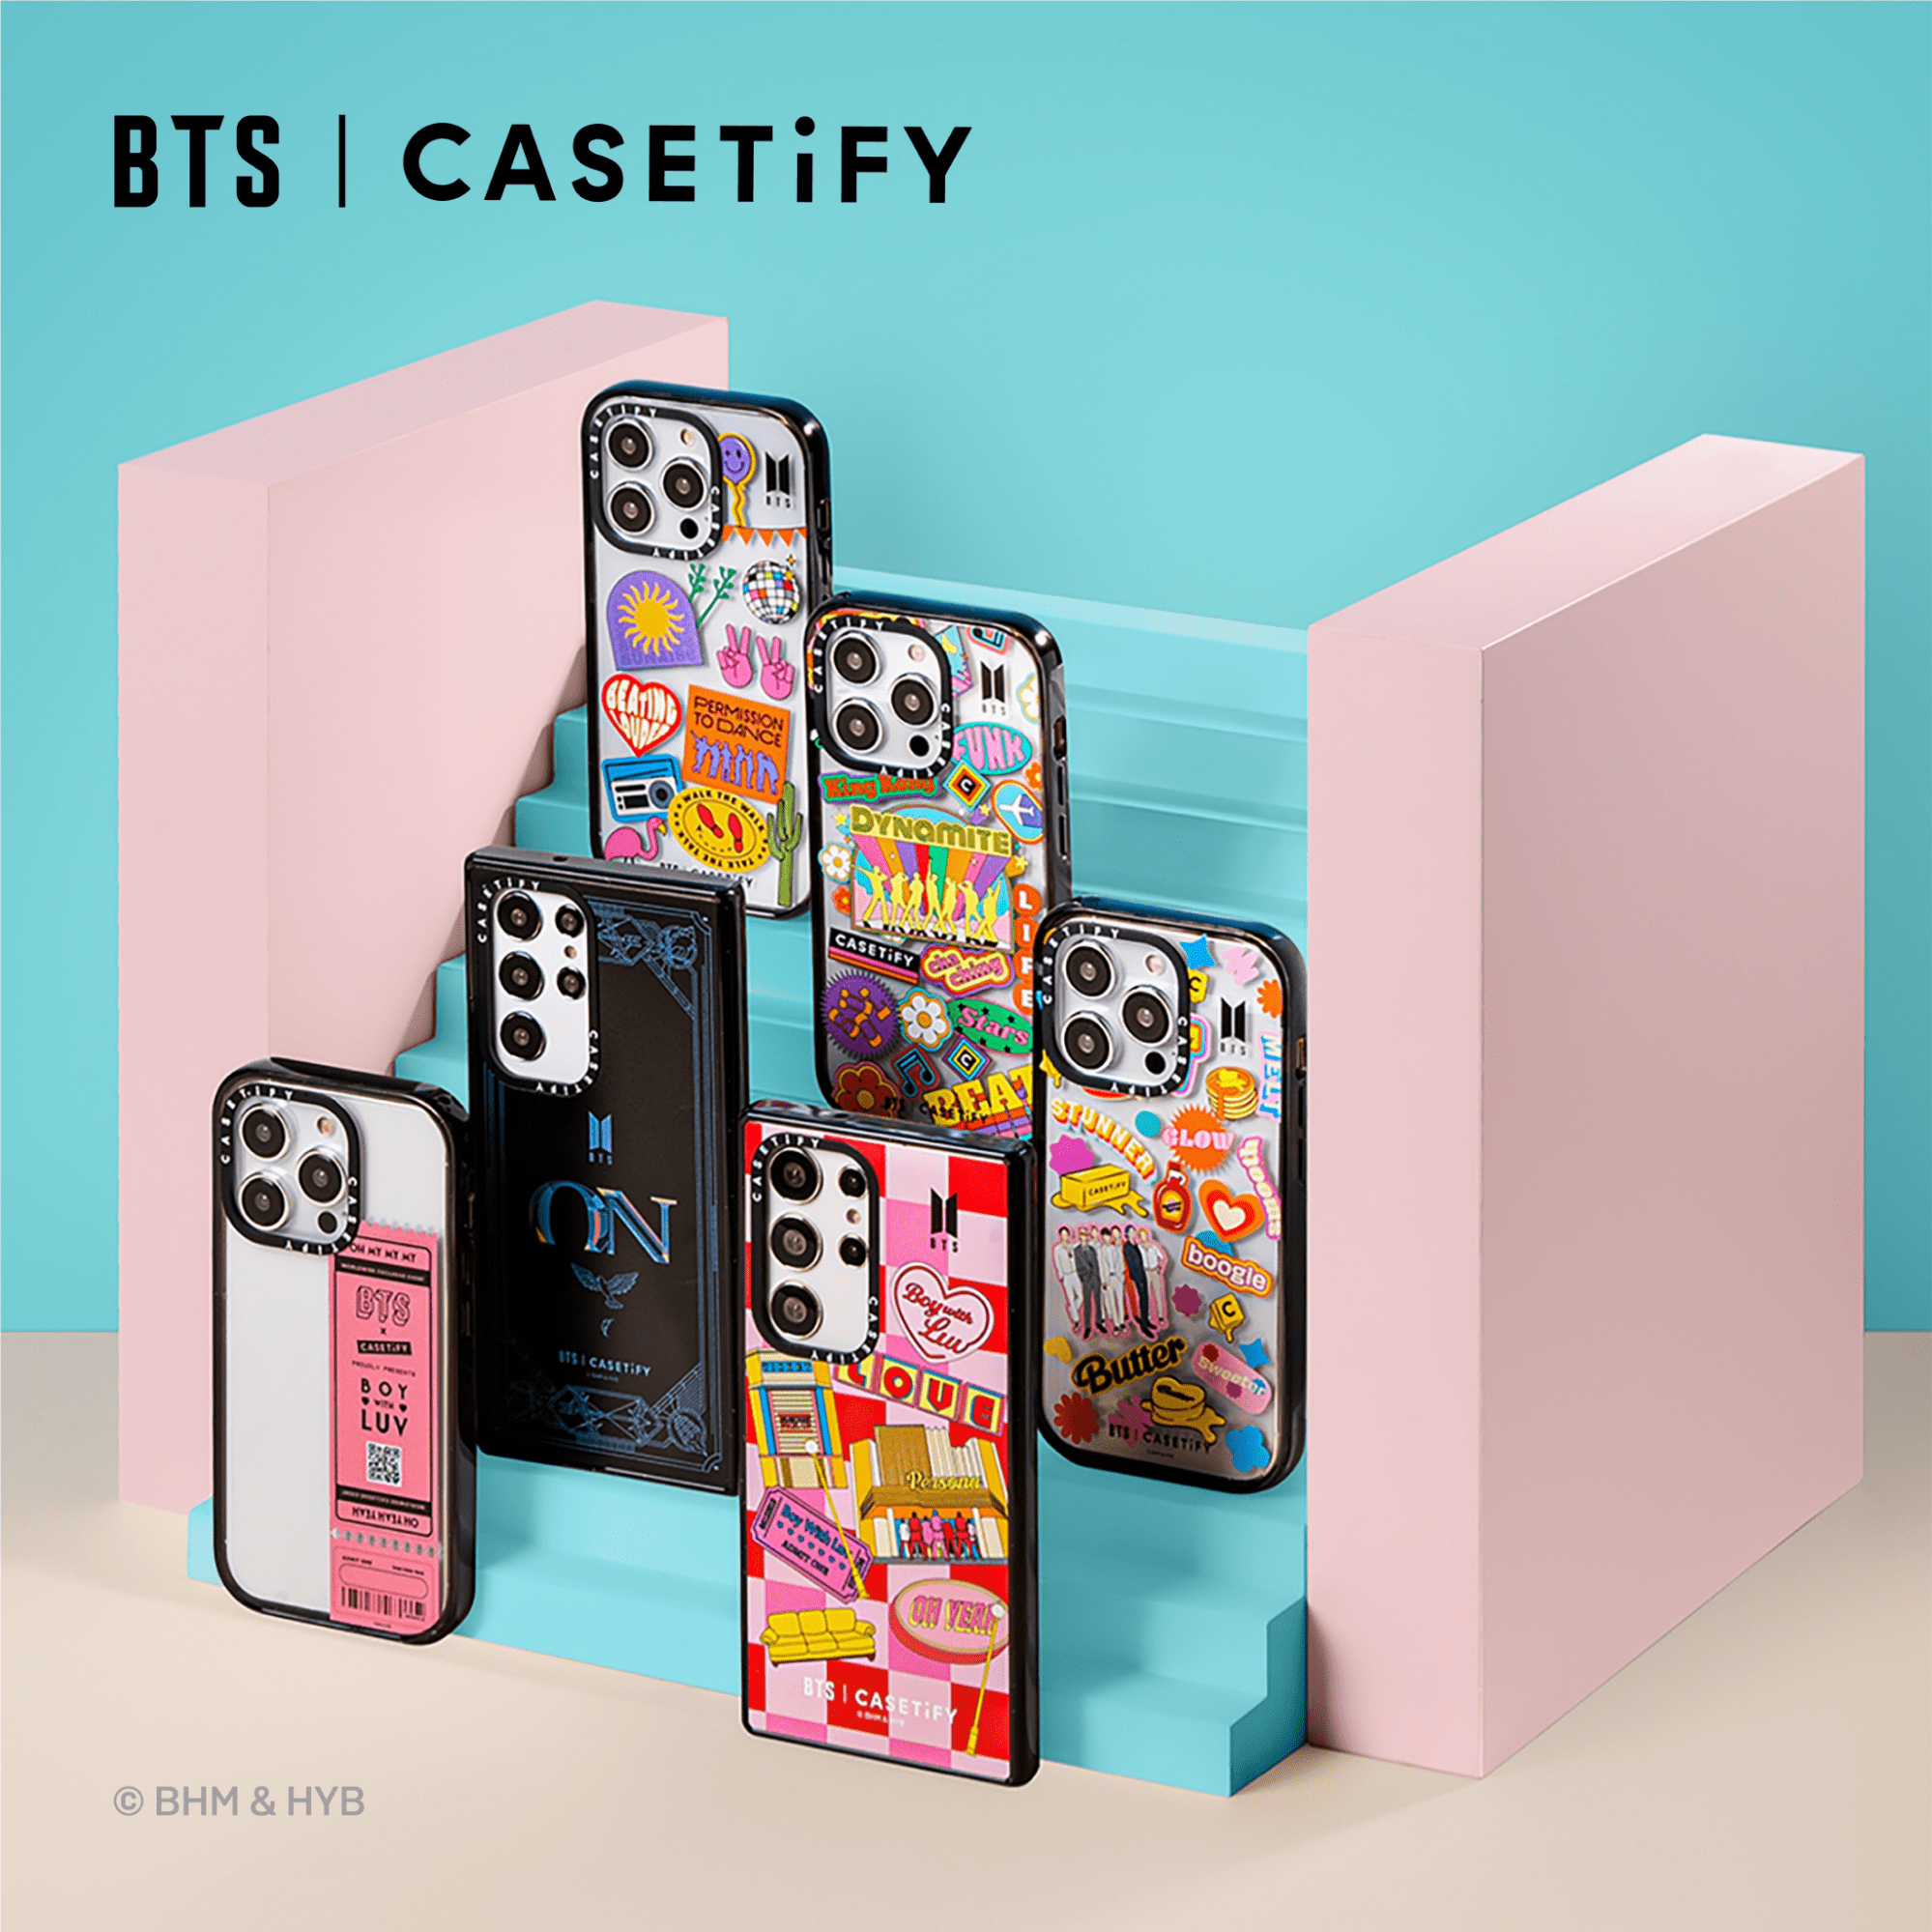 Casetify Opens Physical Store In Singapore, Has Up To 25% Off